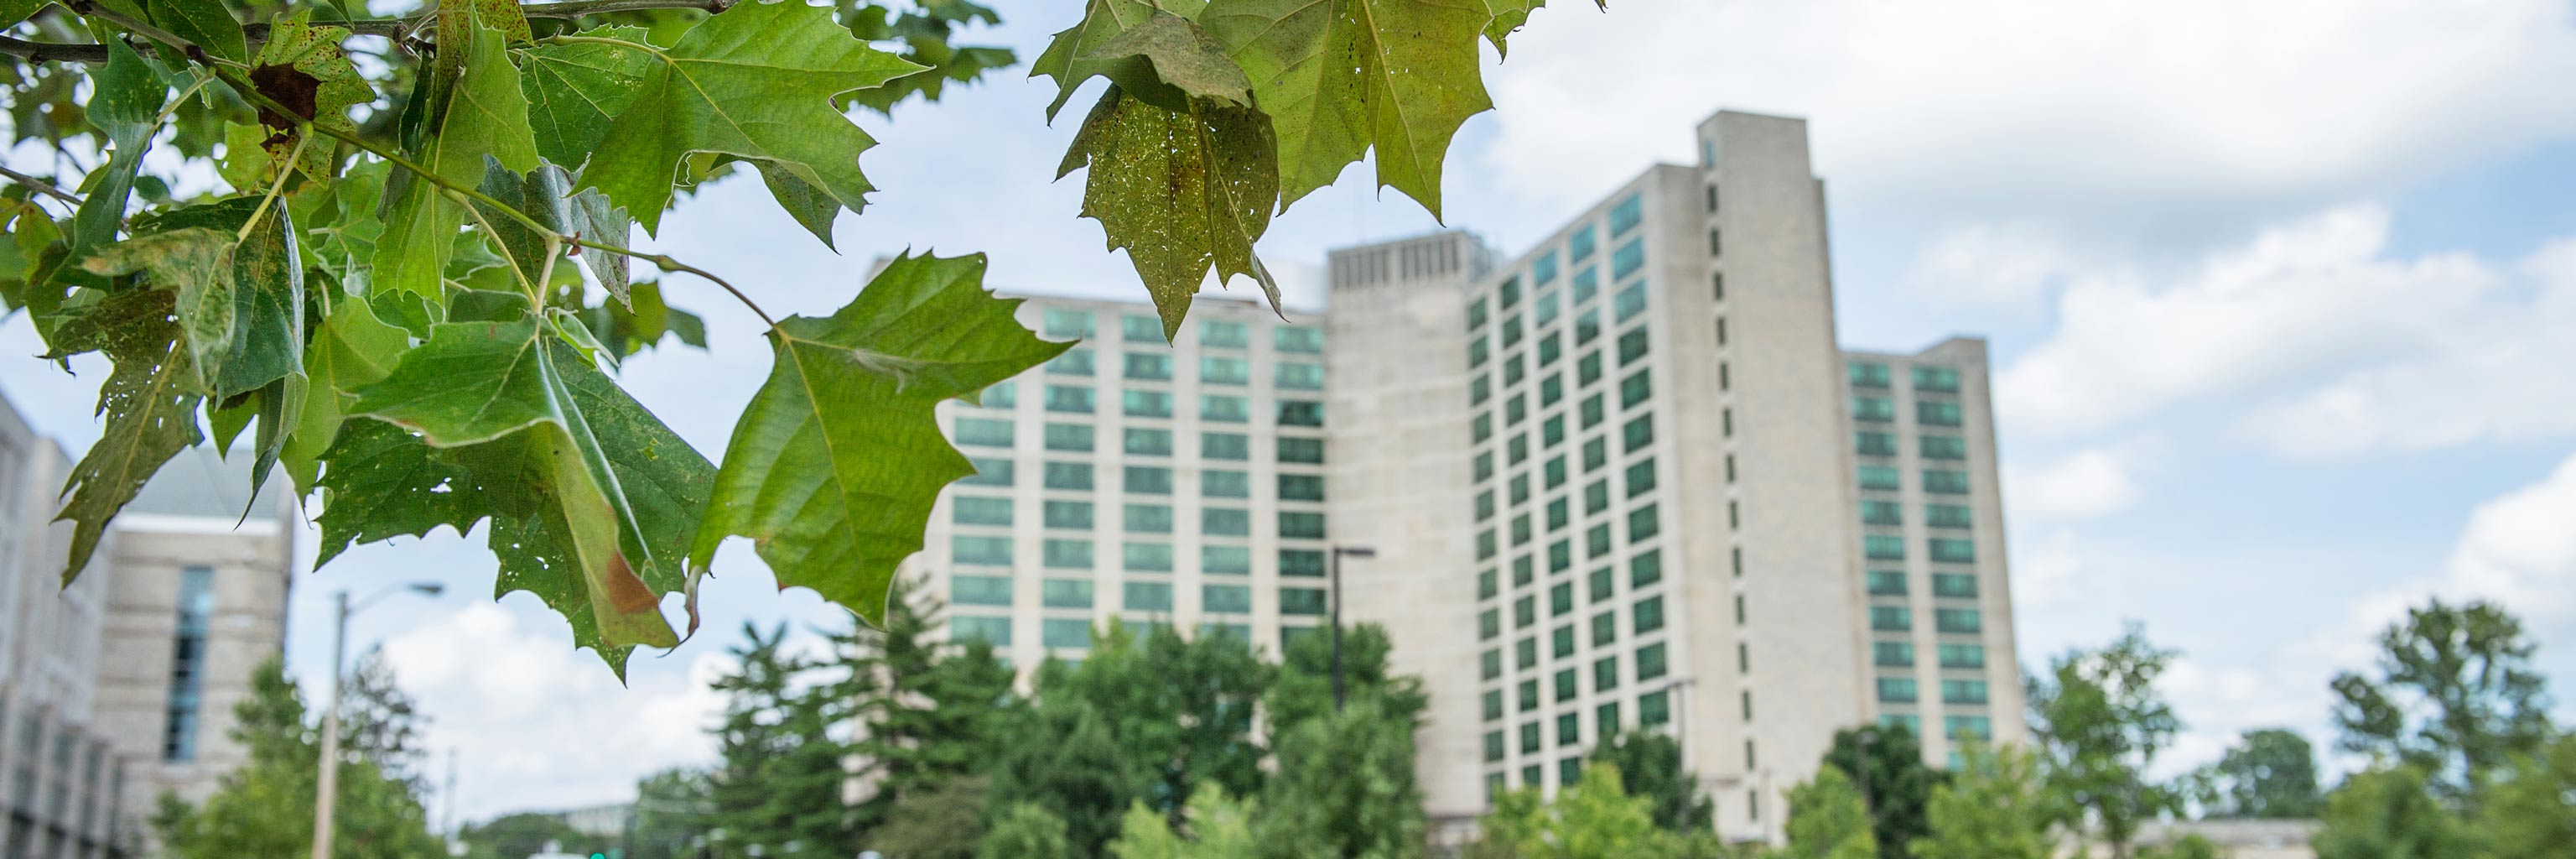 tree leaves with Eigenmann Hall in the background